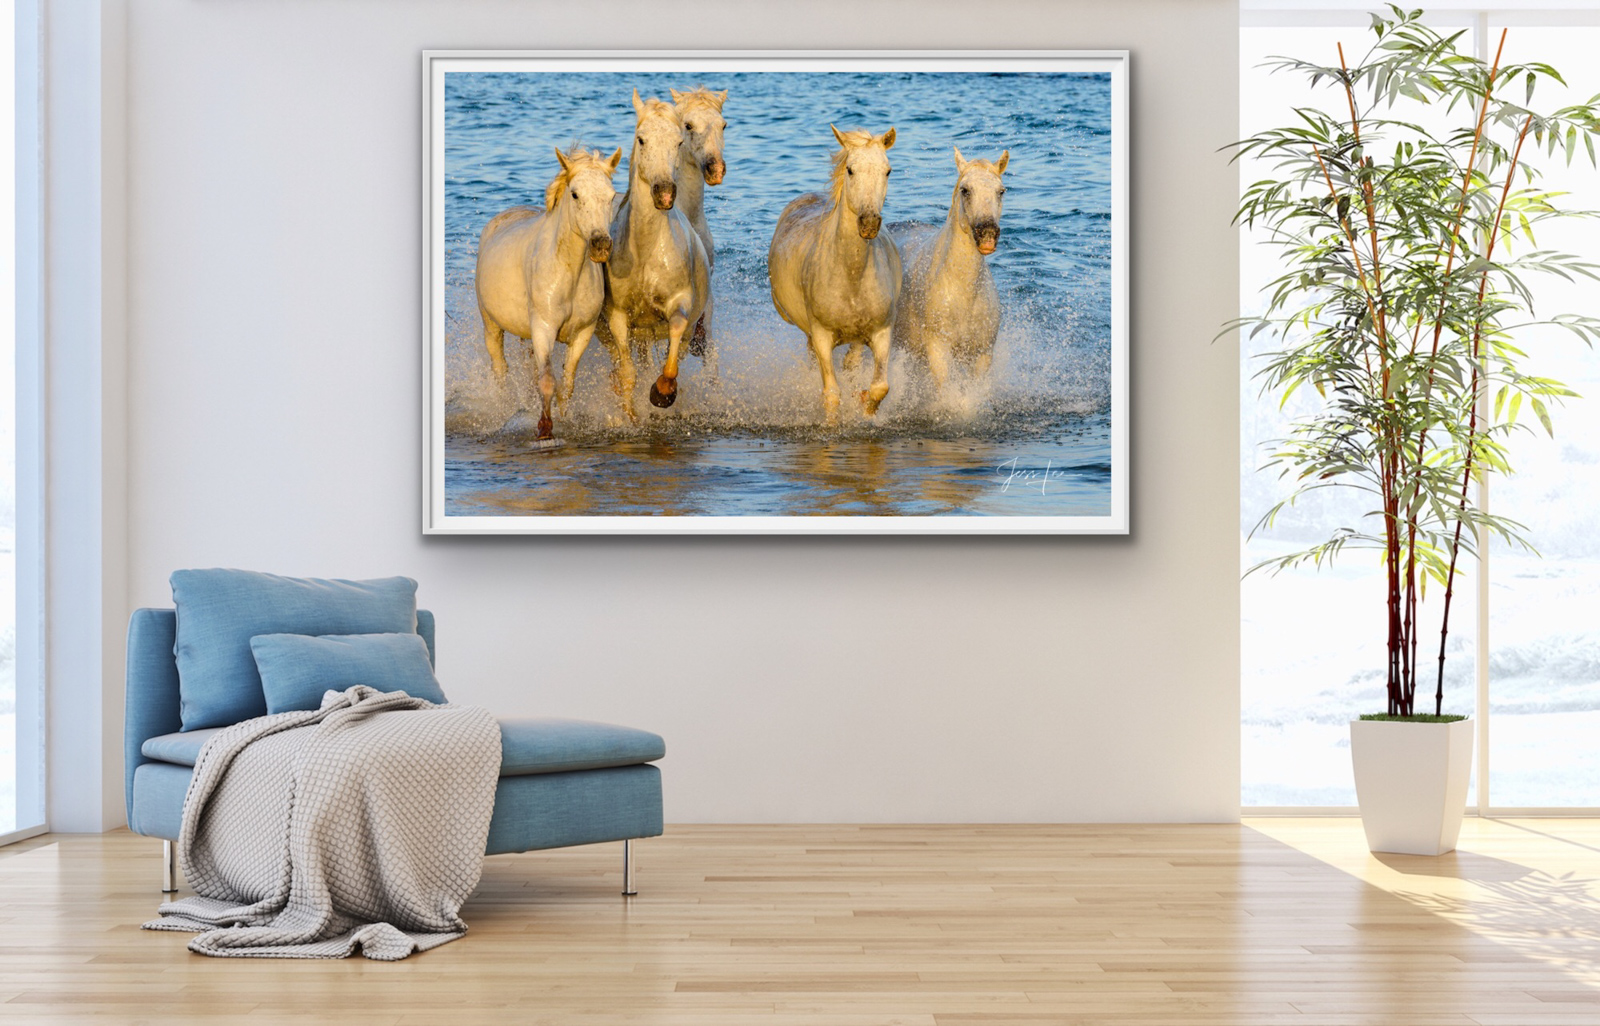 Luxury Fine High Quaintly Photography Prints on your wall art space. By world Famous Fine art Photographer Jess Lee